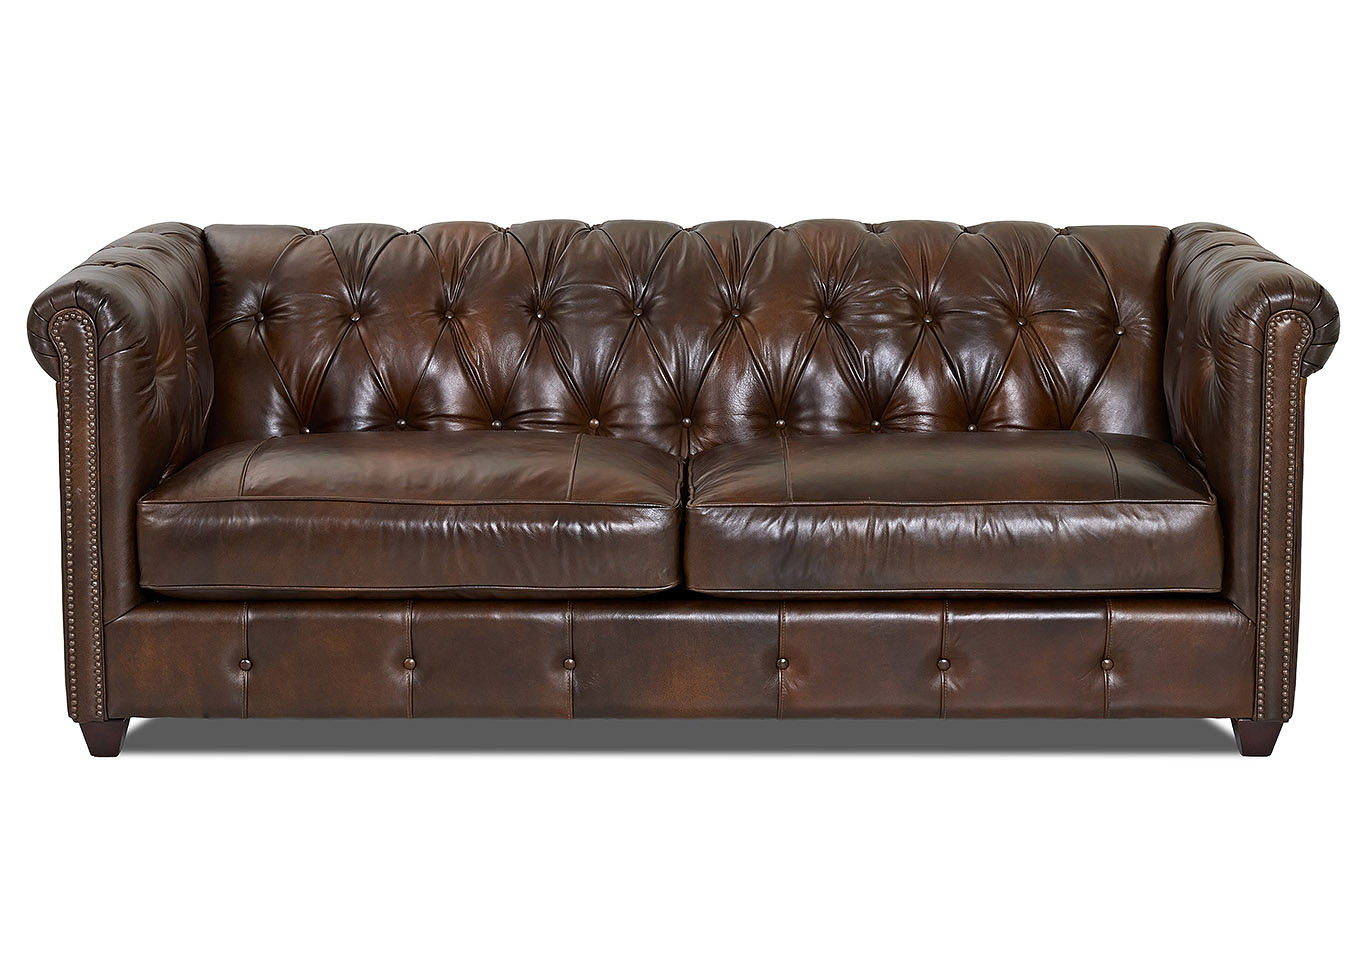 Beech Mountain Chesterfield Whiskey Leather Stationary Sofa,Klaussner Home Furnishings